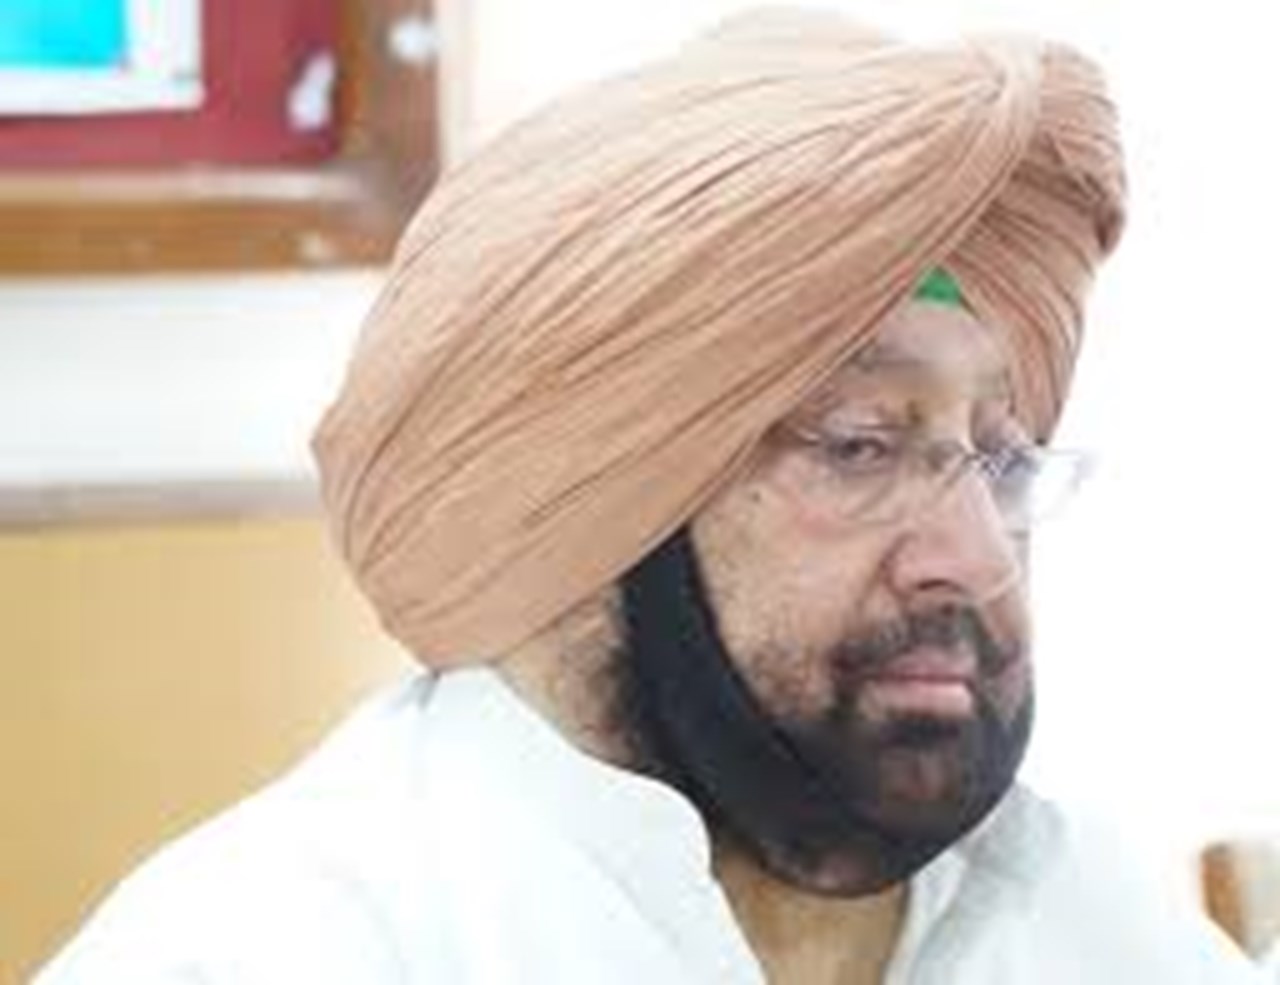 Amarinder promises more loan waivers, subject to fiscal condition of Punjab